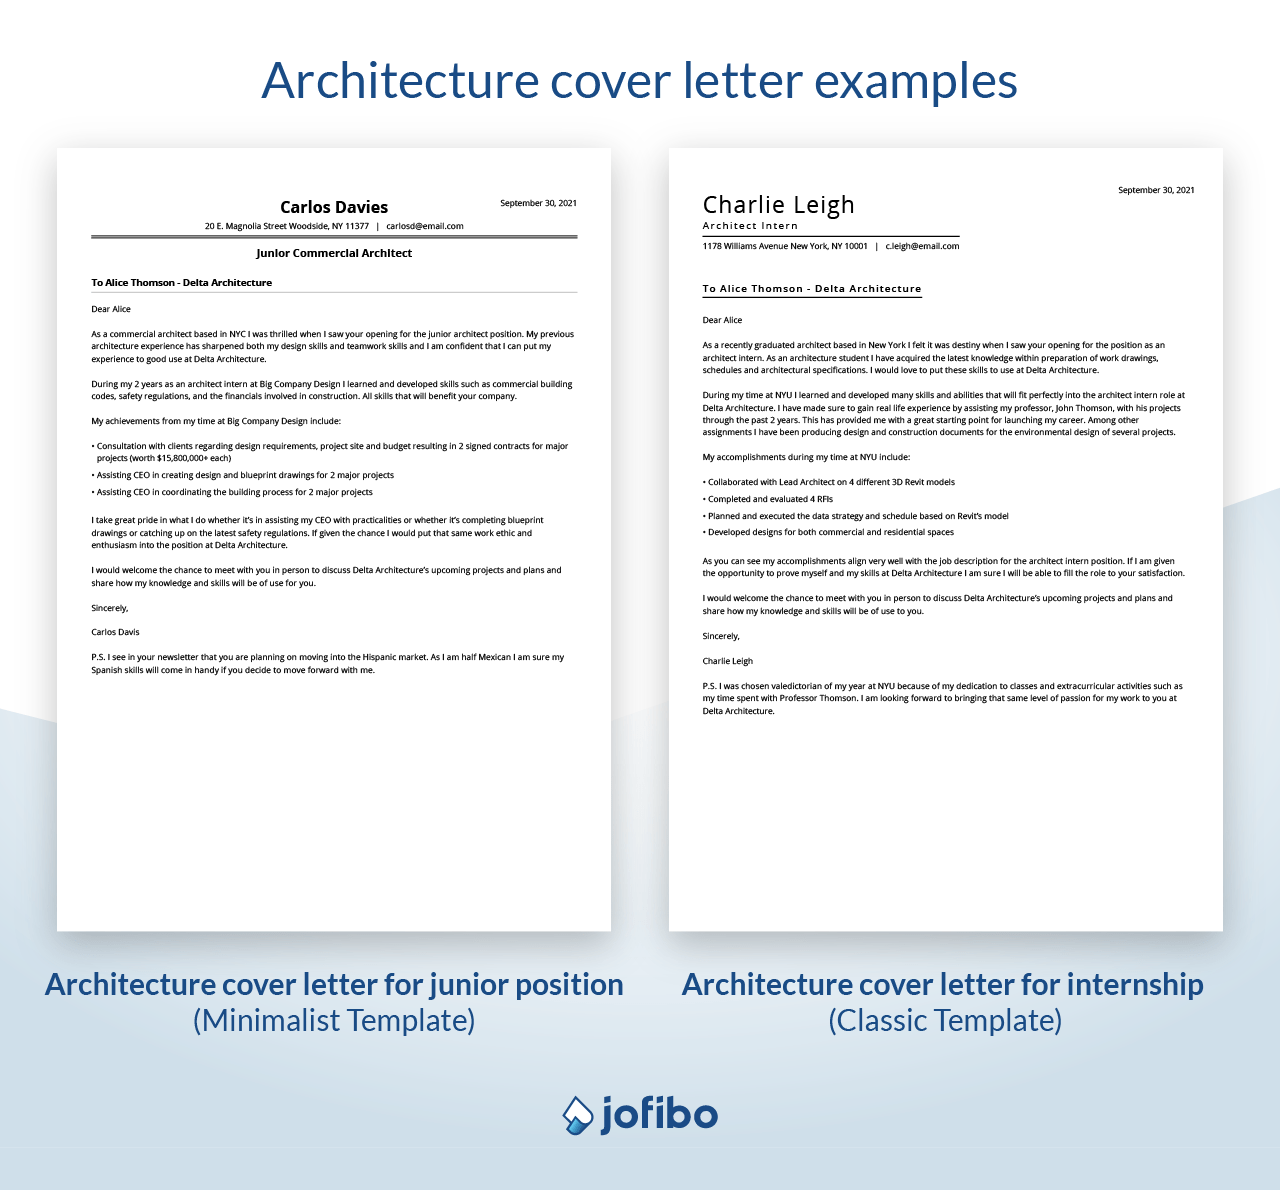 Architecture cover letters examples for intern position and junior position